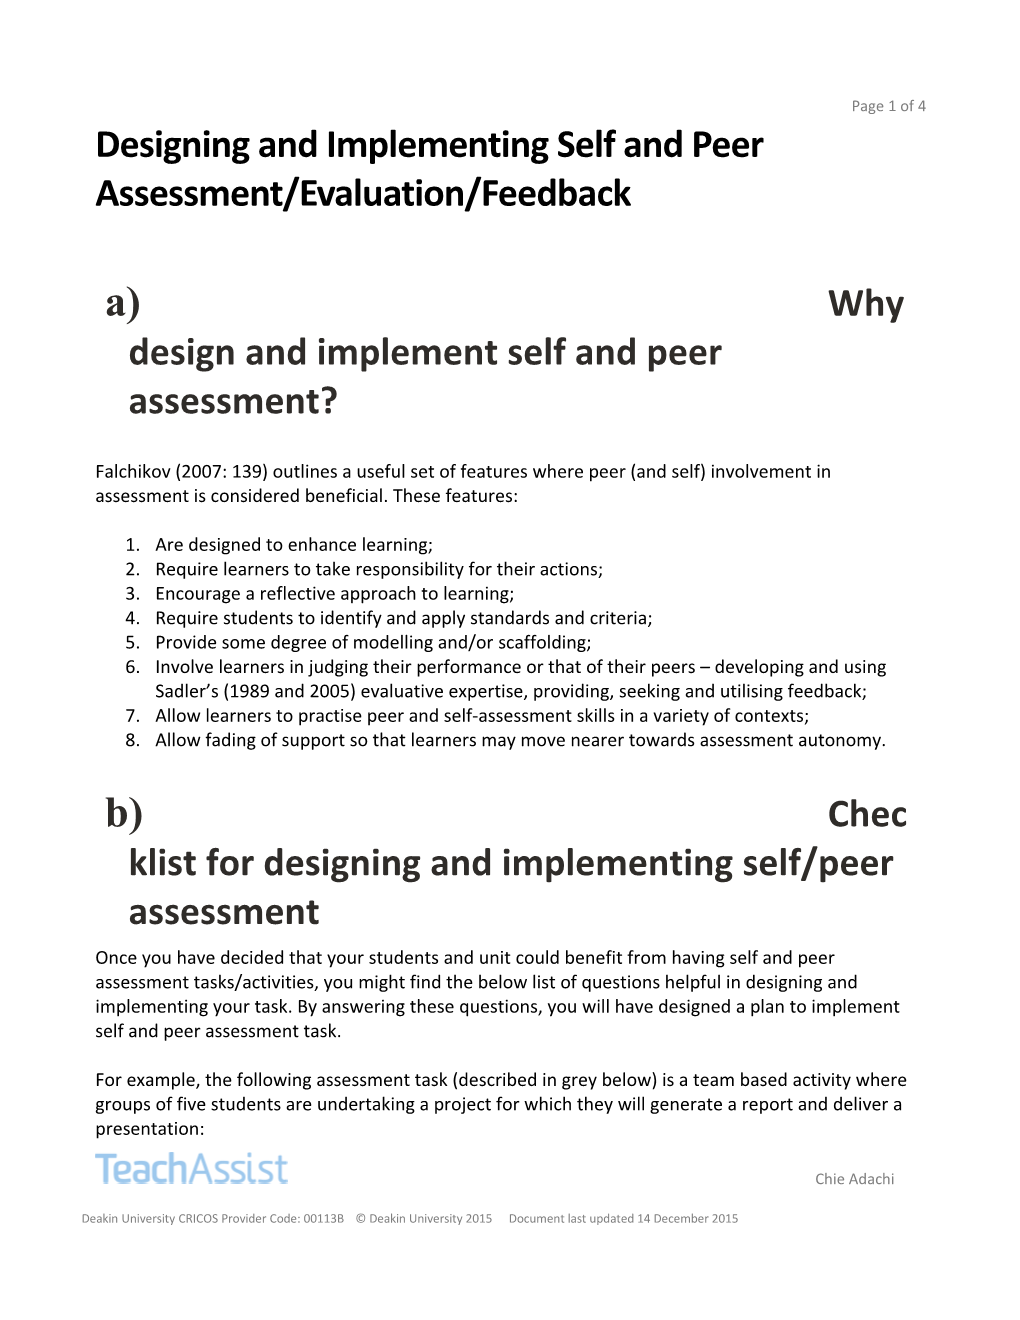 Designing and Implementing Self and Peer Assessment/Evaluation/Feedback